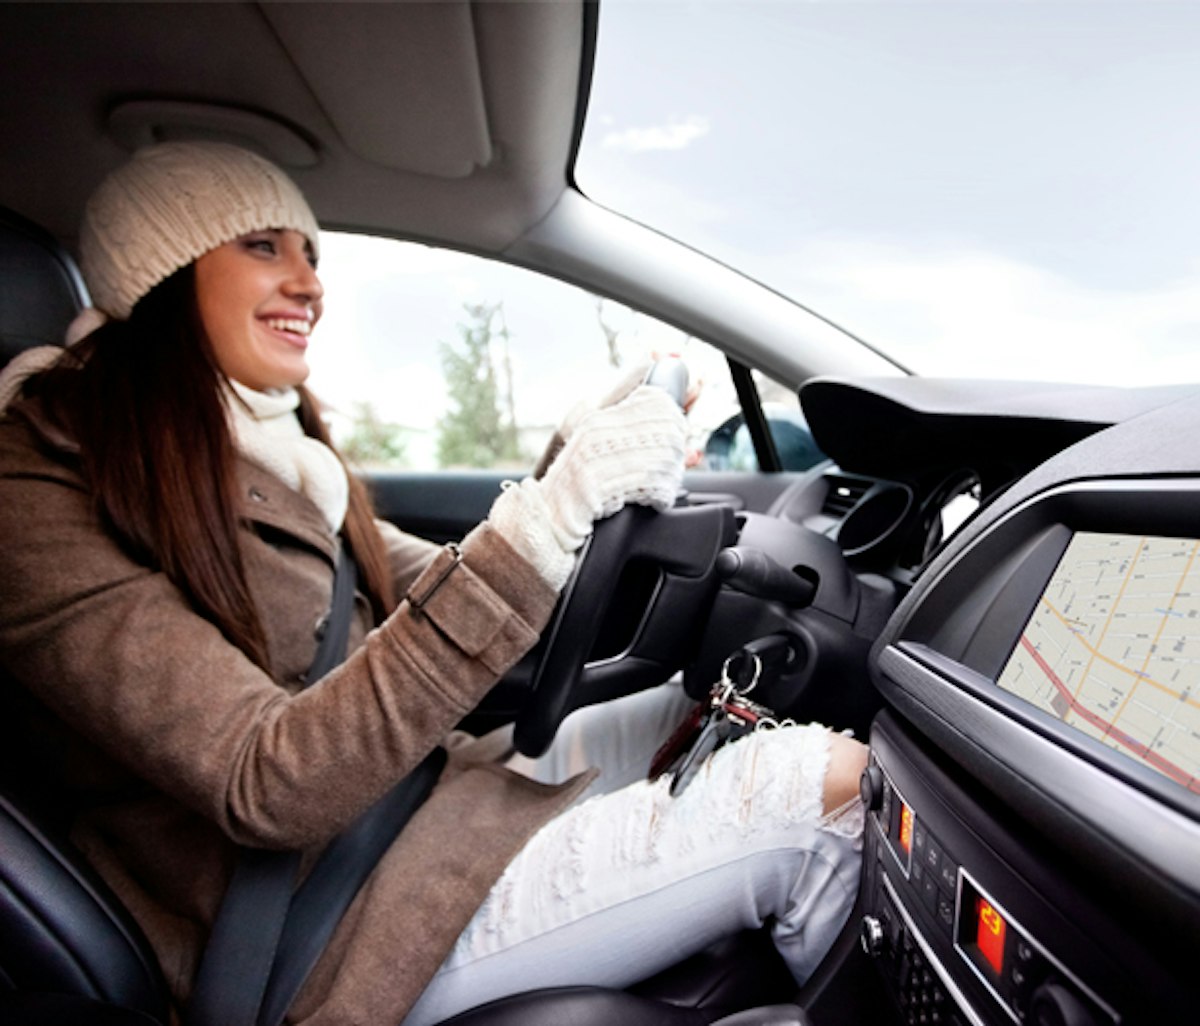 A smiling person wearing a winter hat and scarf driving a car with a navigation system on the dashboard.